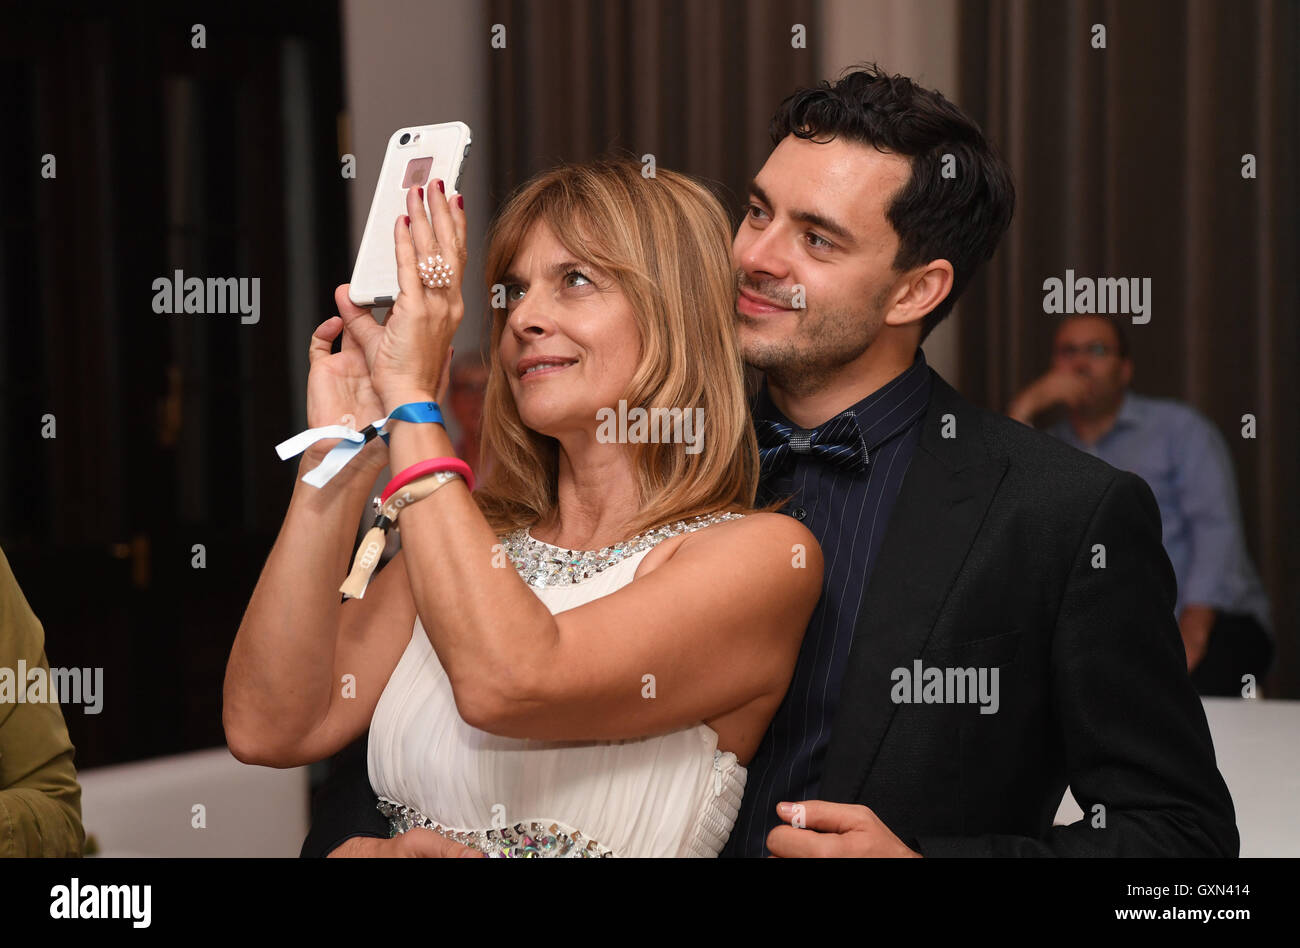 Baden-Baden, Germany. 16th September, 2016. Nastassja Kinski and her boyfriend Ilia Russo attend the after show party of the recording of the TV-Show 'SWR3 New Pop Festival - Das Special' at the festival hall Baden-Baden, Germany, 16 September 2016. Credit:  dpa picture alliance/Alamy Live News Stock Photo